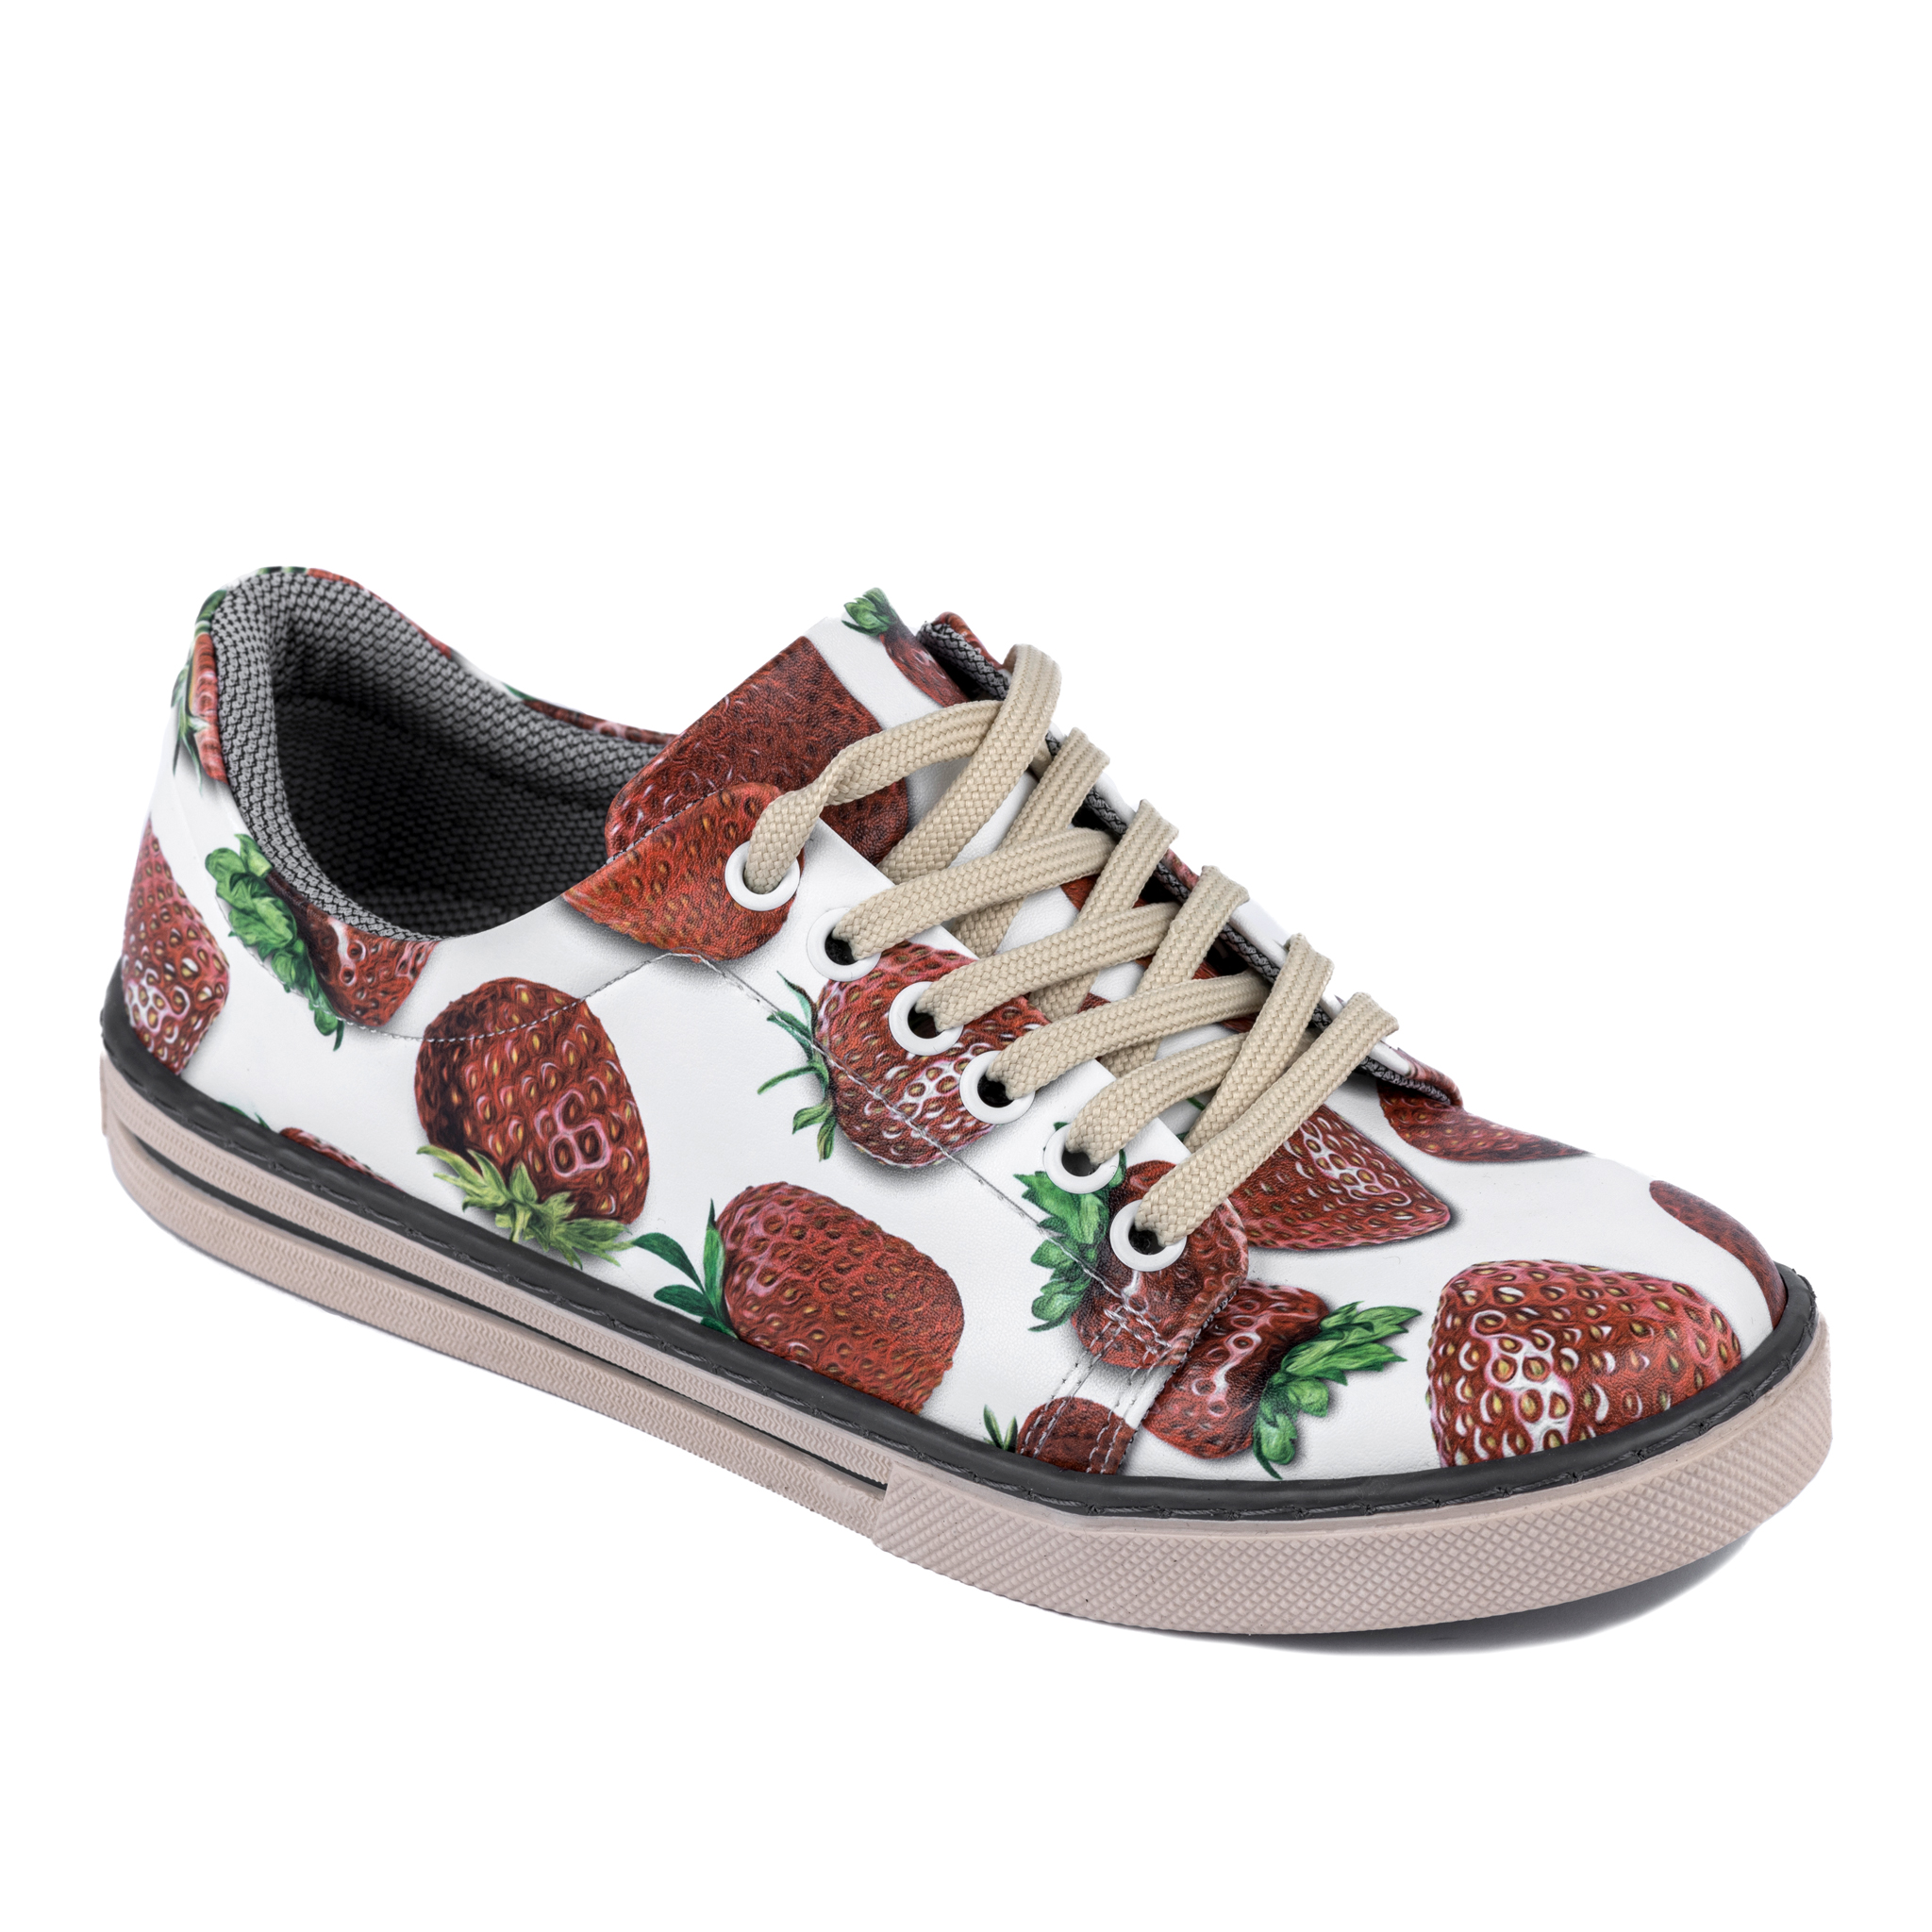 STRAWBERRY LACE UP SNEAKERS - WHITE